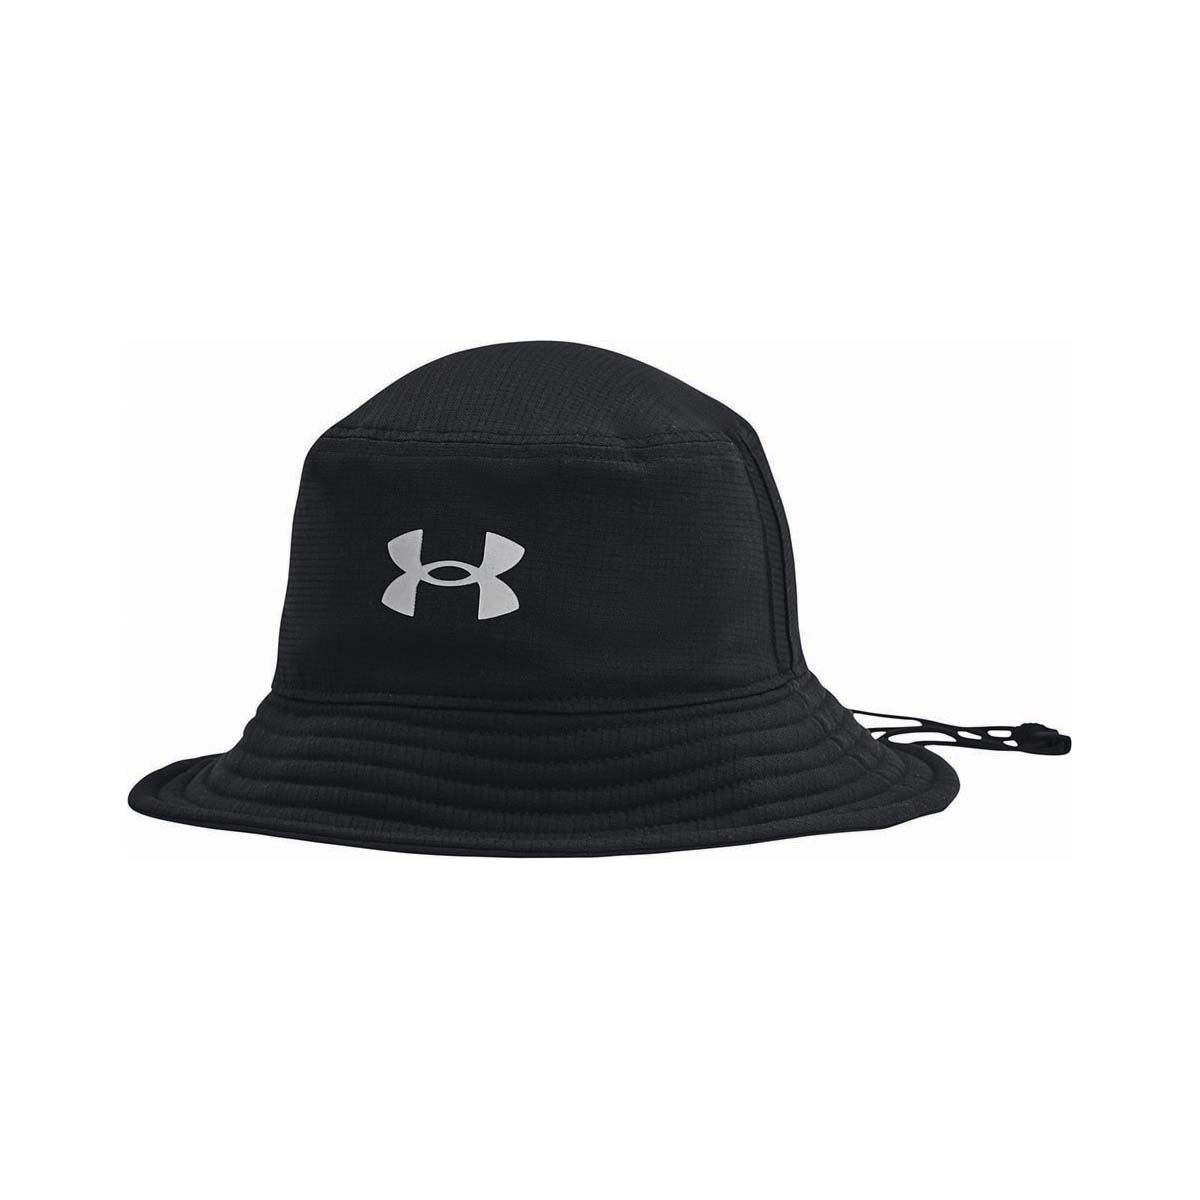 Under Armour Mens Isochill Armourvent Bucket Hat Black / Pitch Grey L